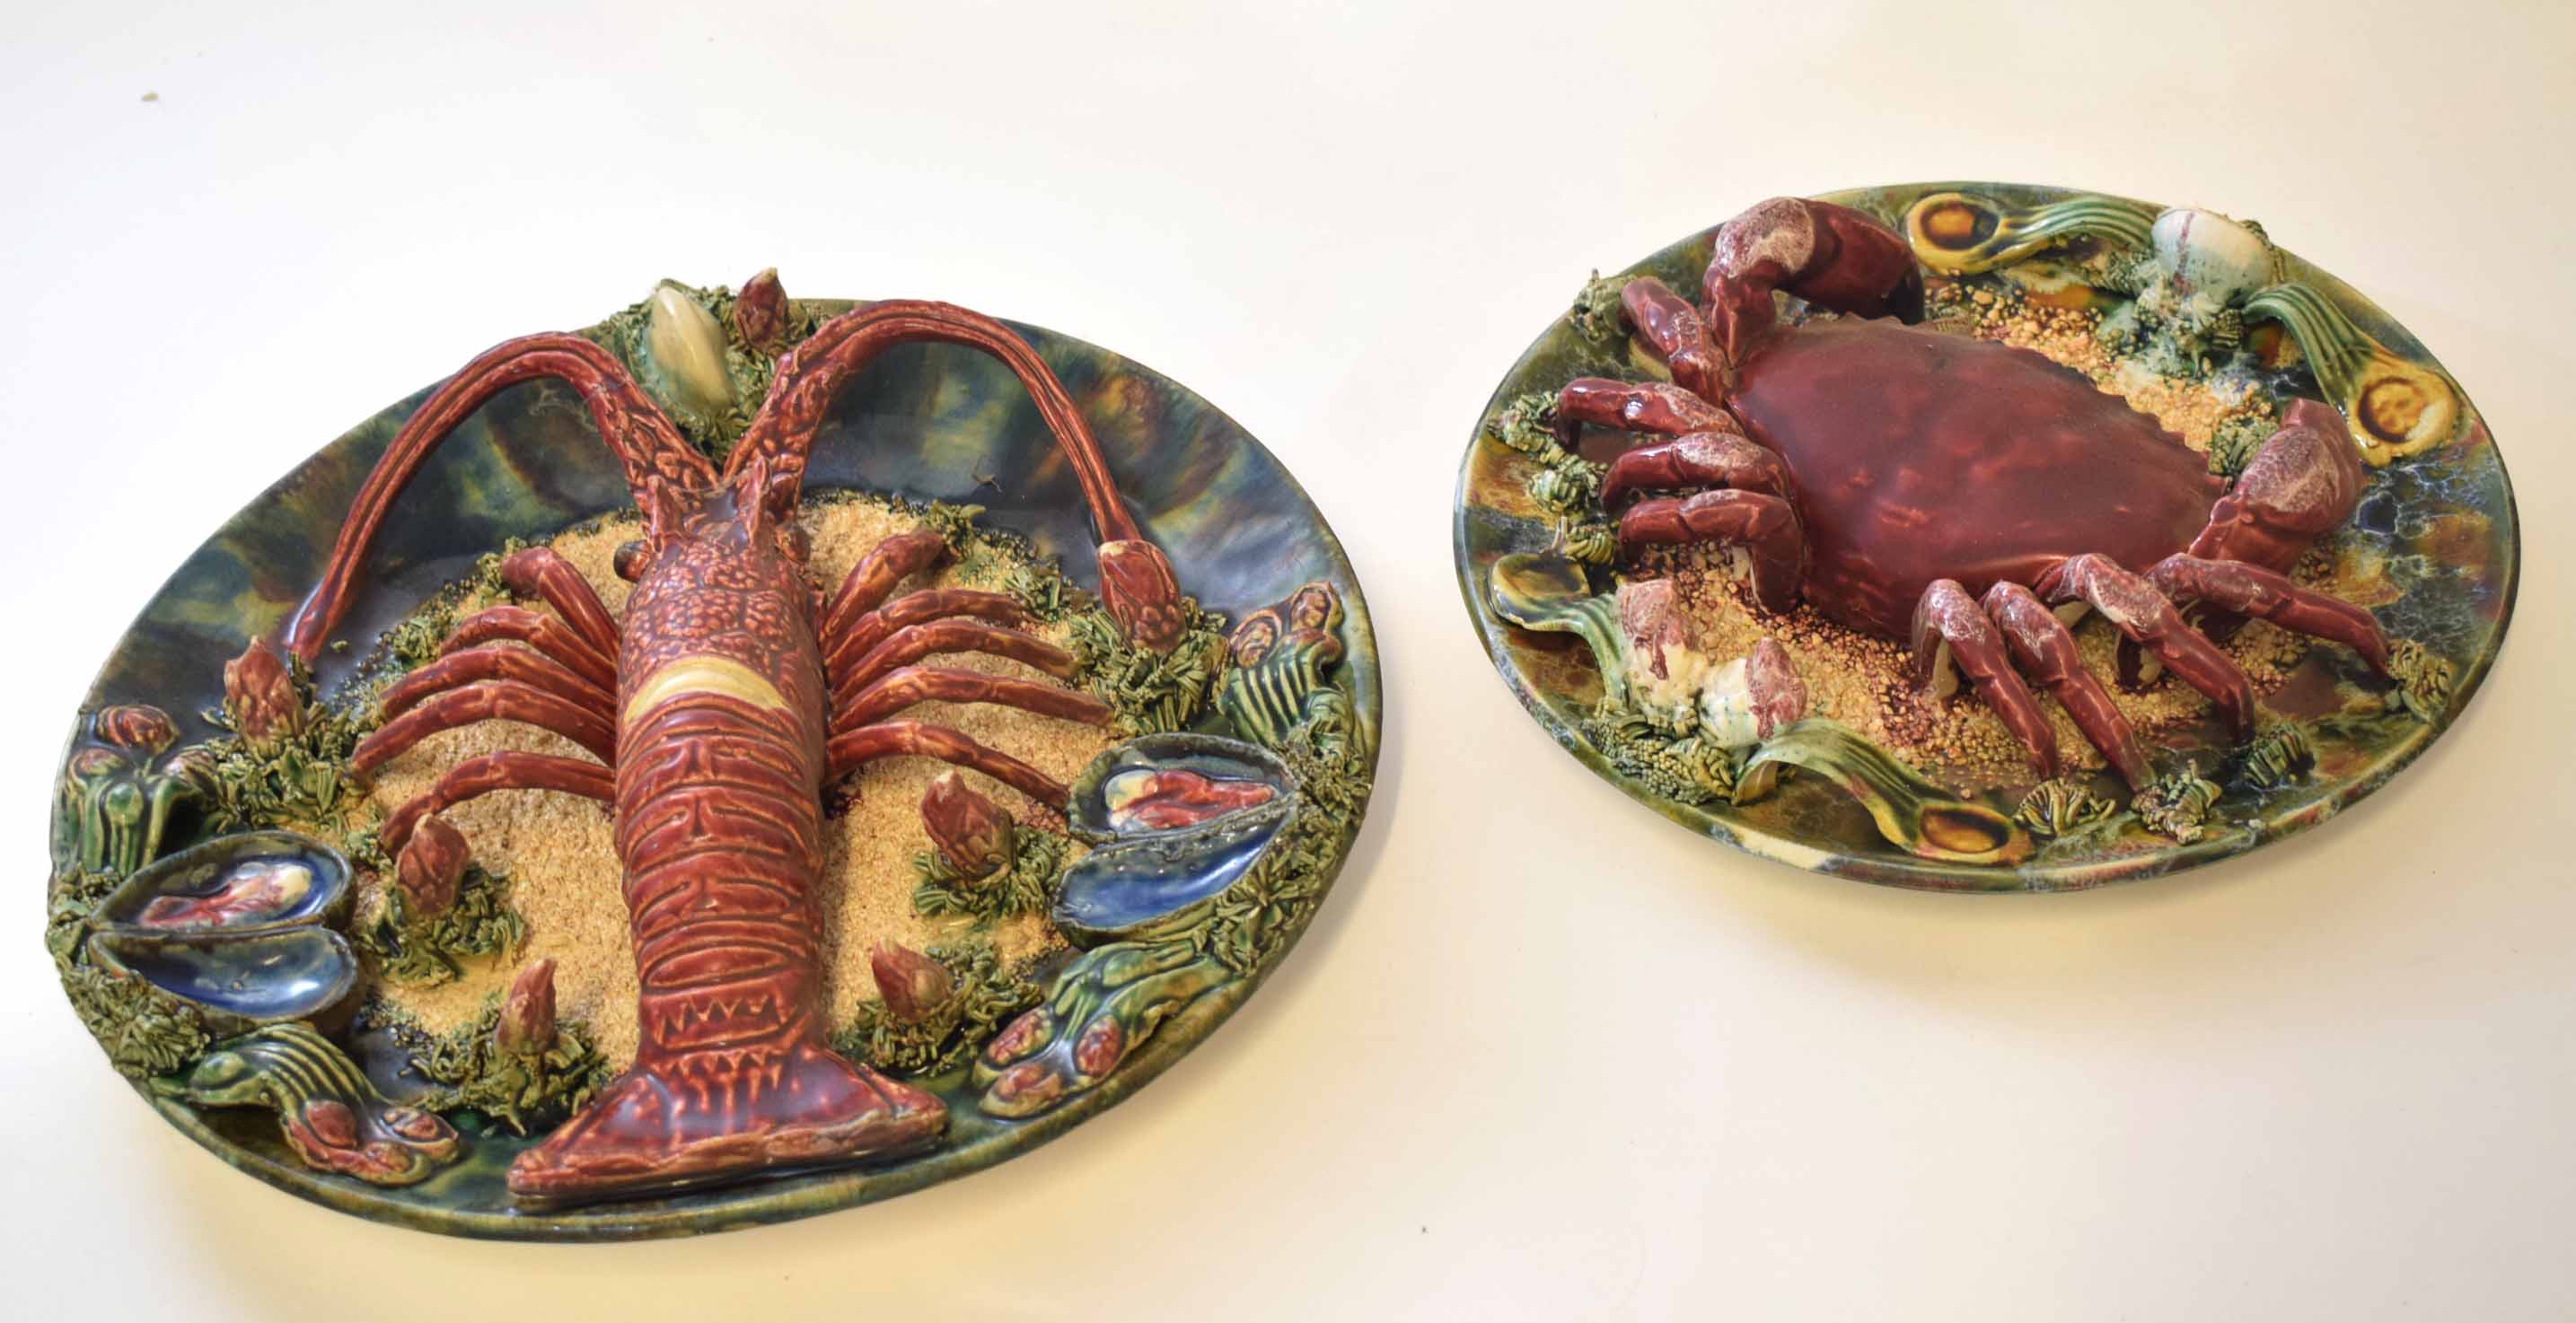 Two dishes with Pallasey type glazes, one with a crab, the other with a lobster, surrounded by